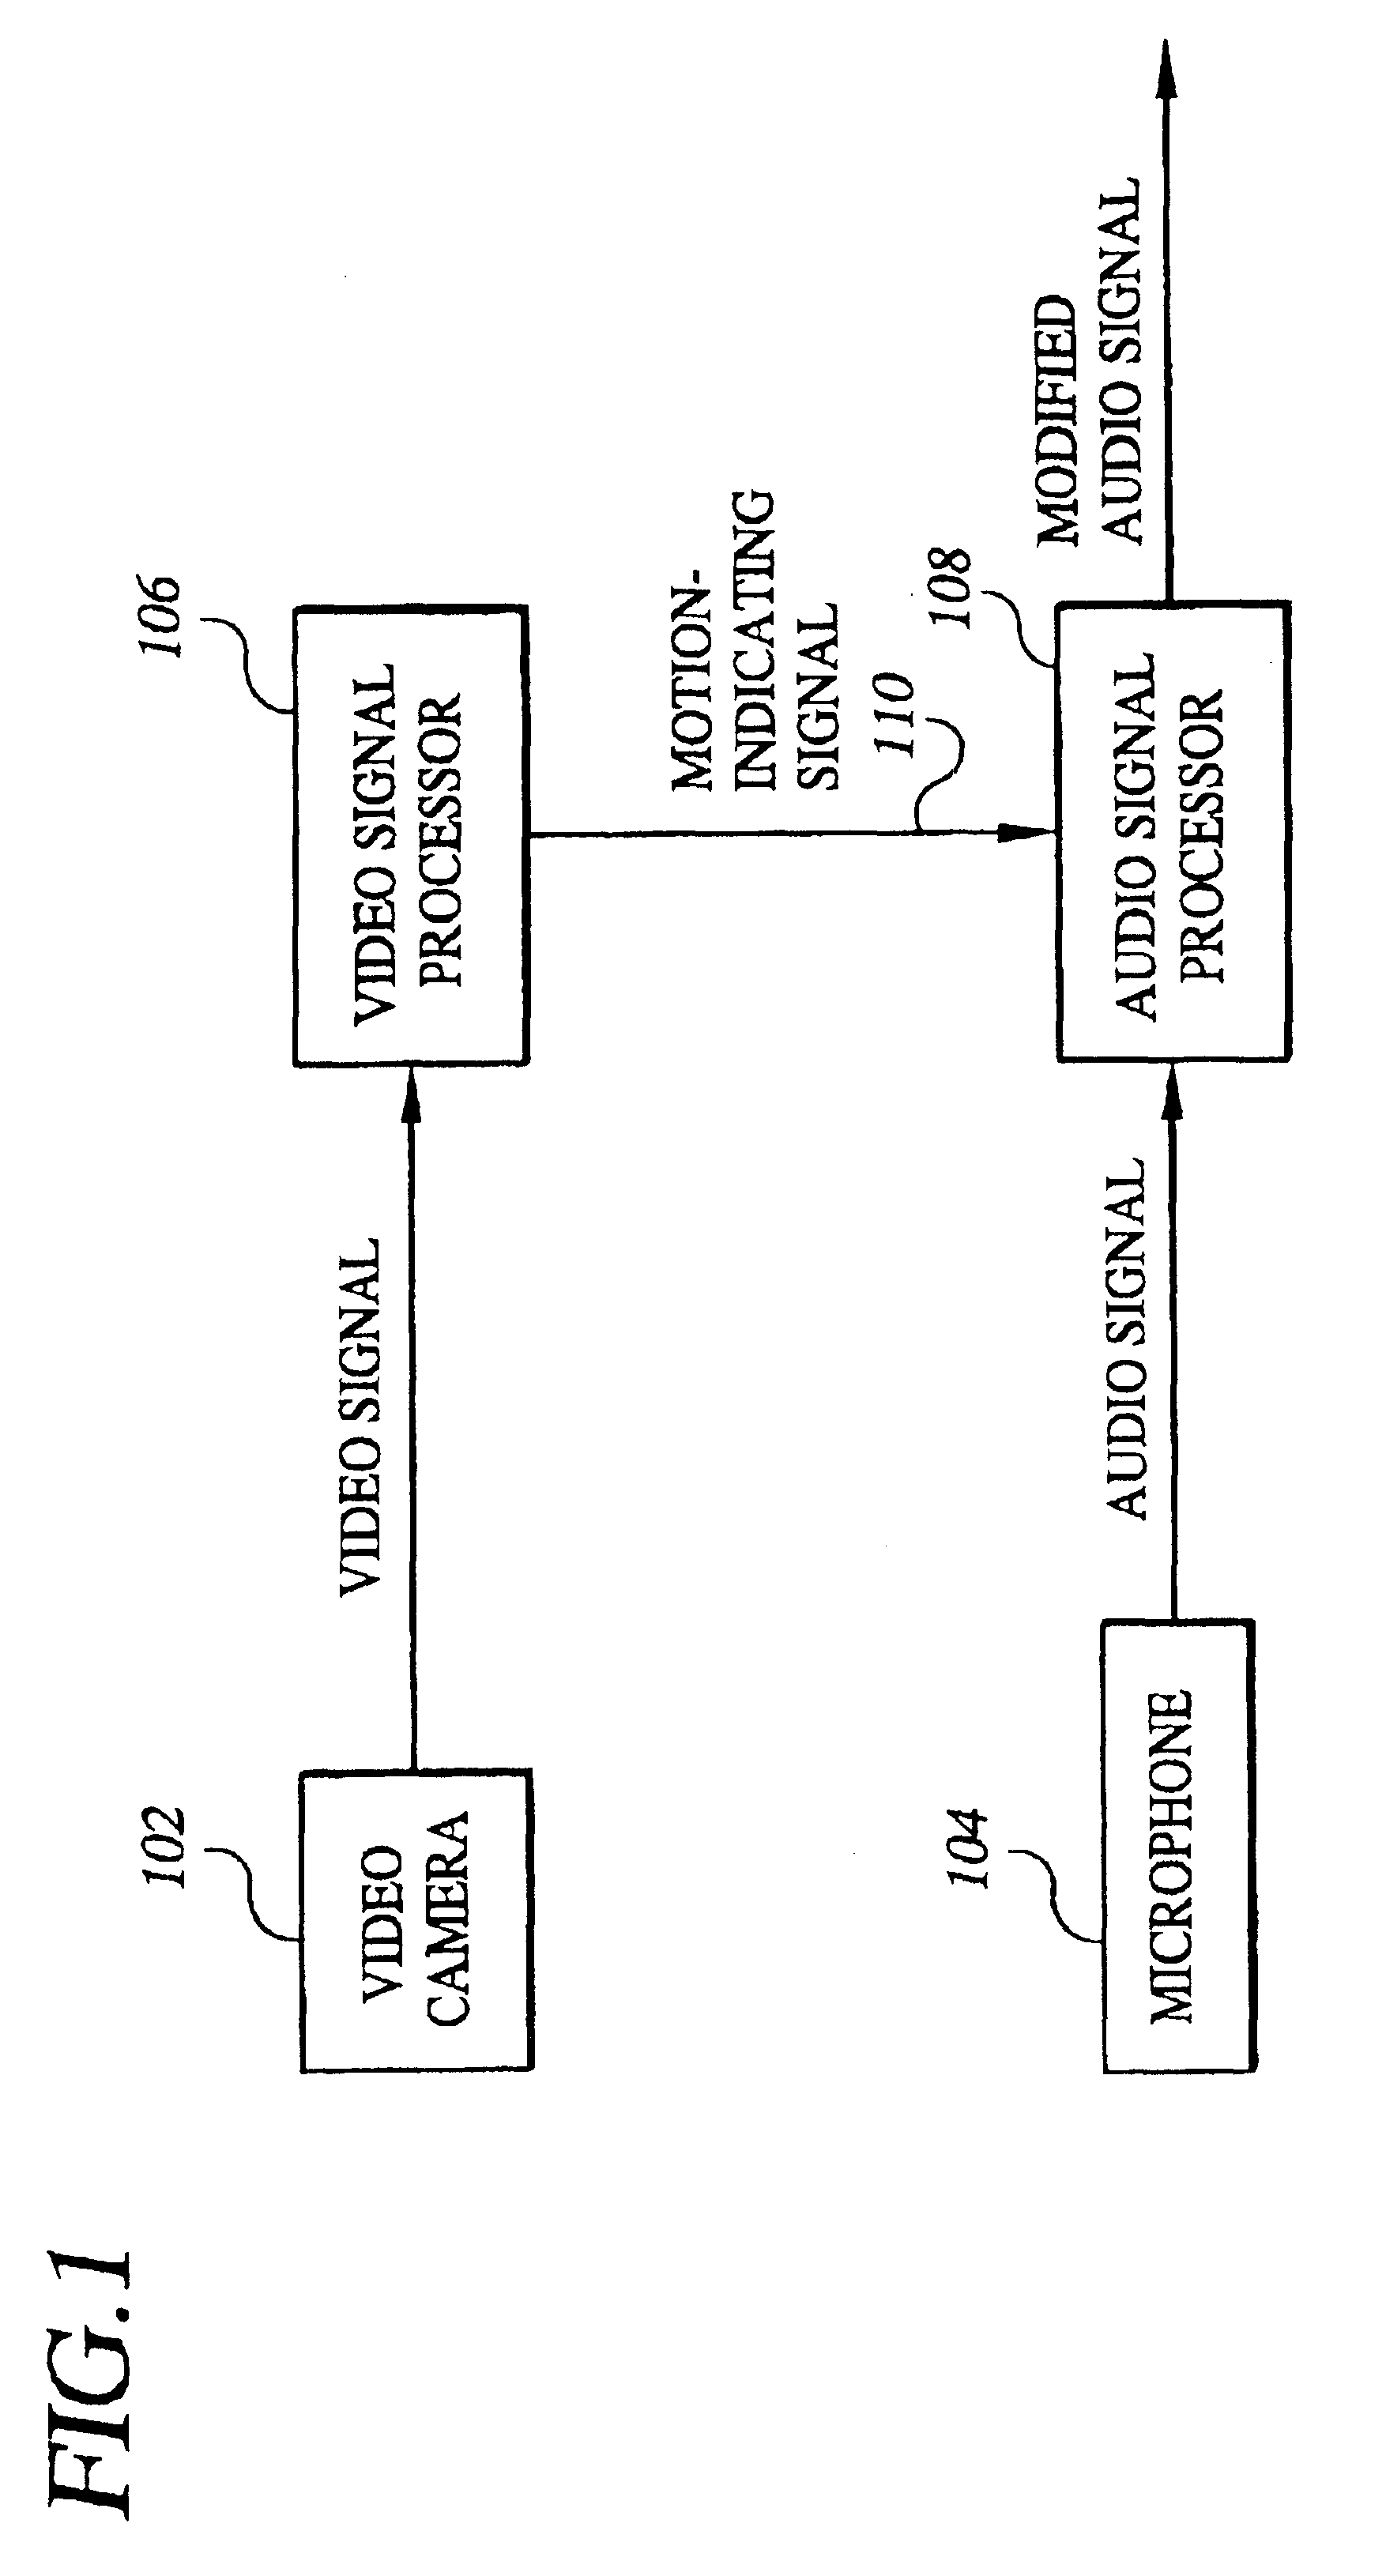 Video-assisted audio signal processing system and method